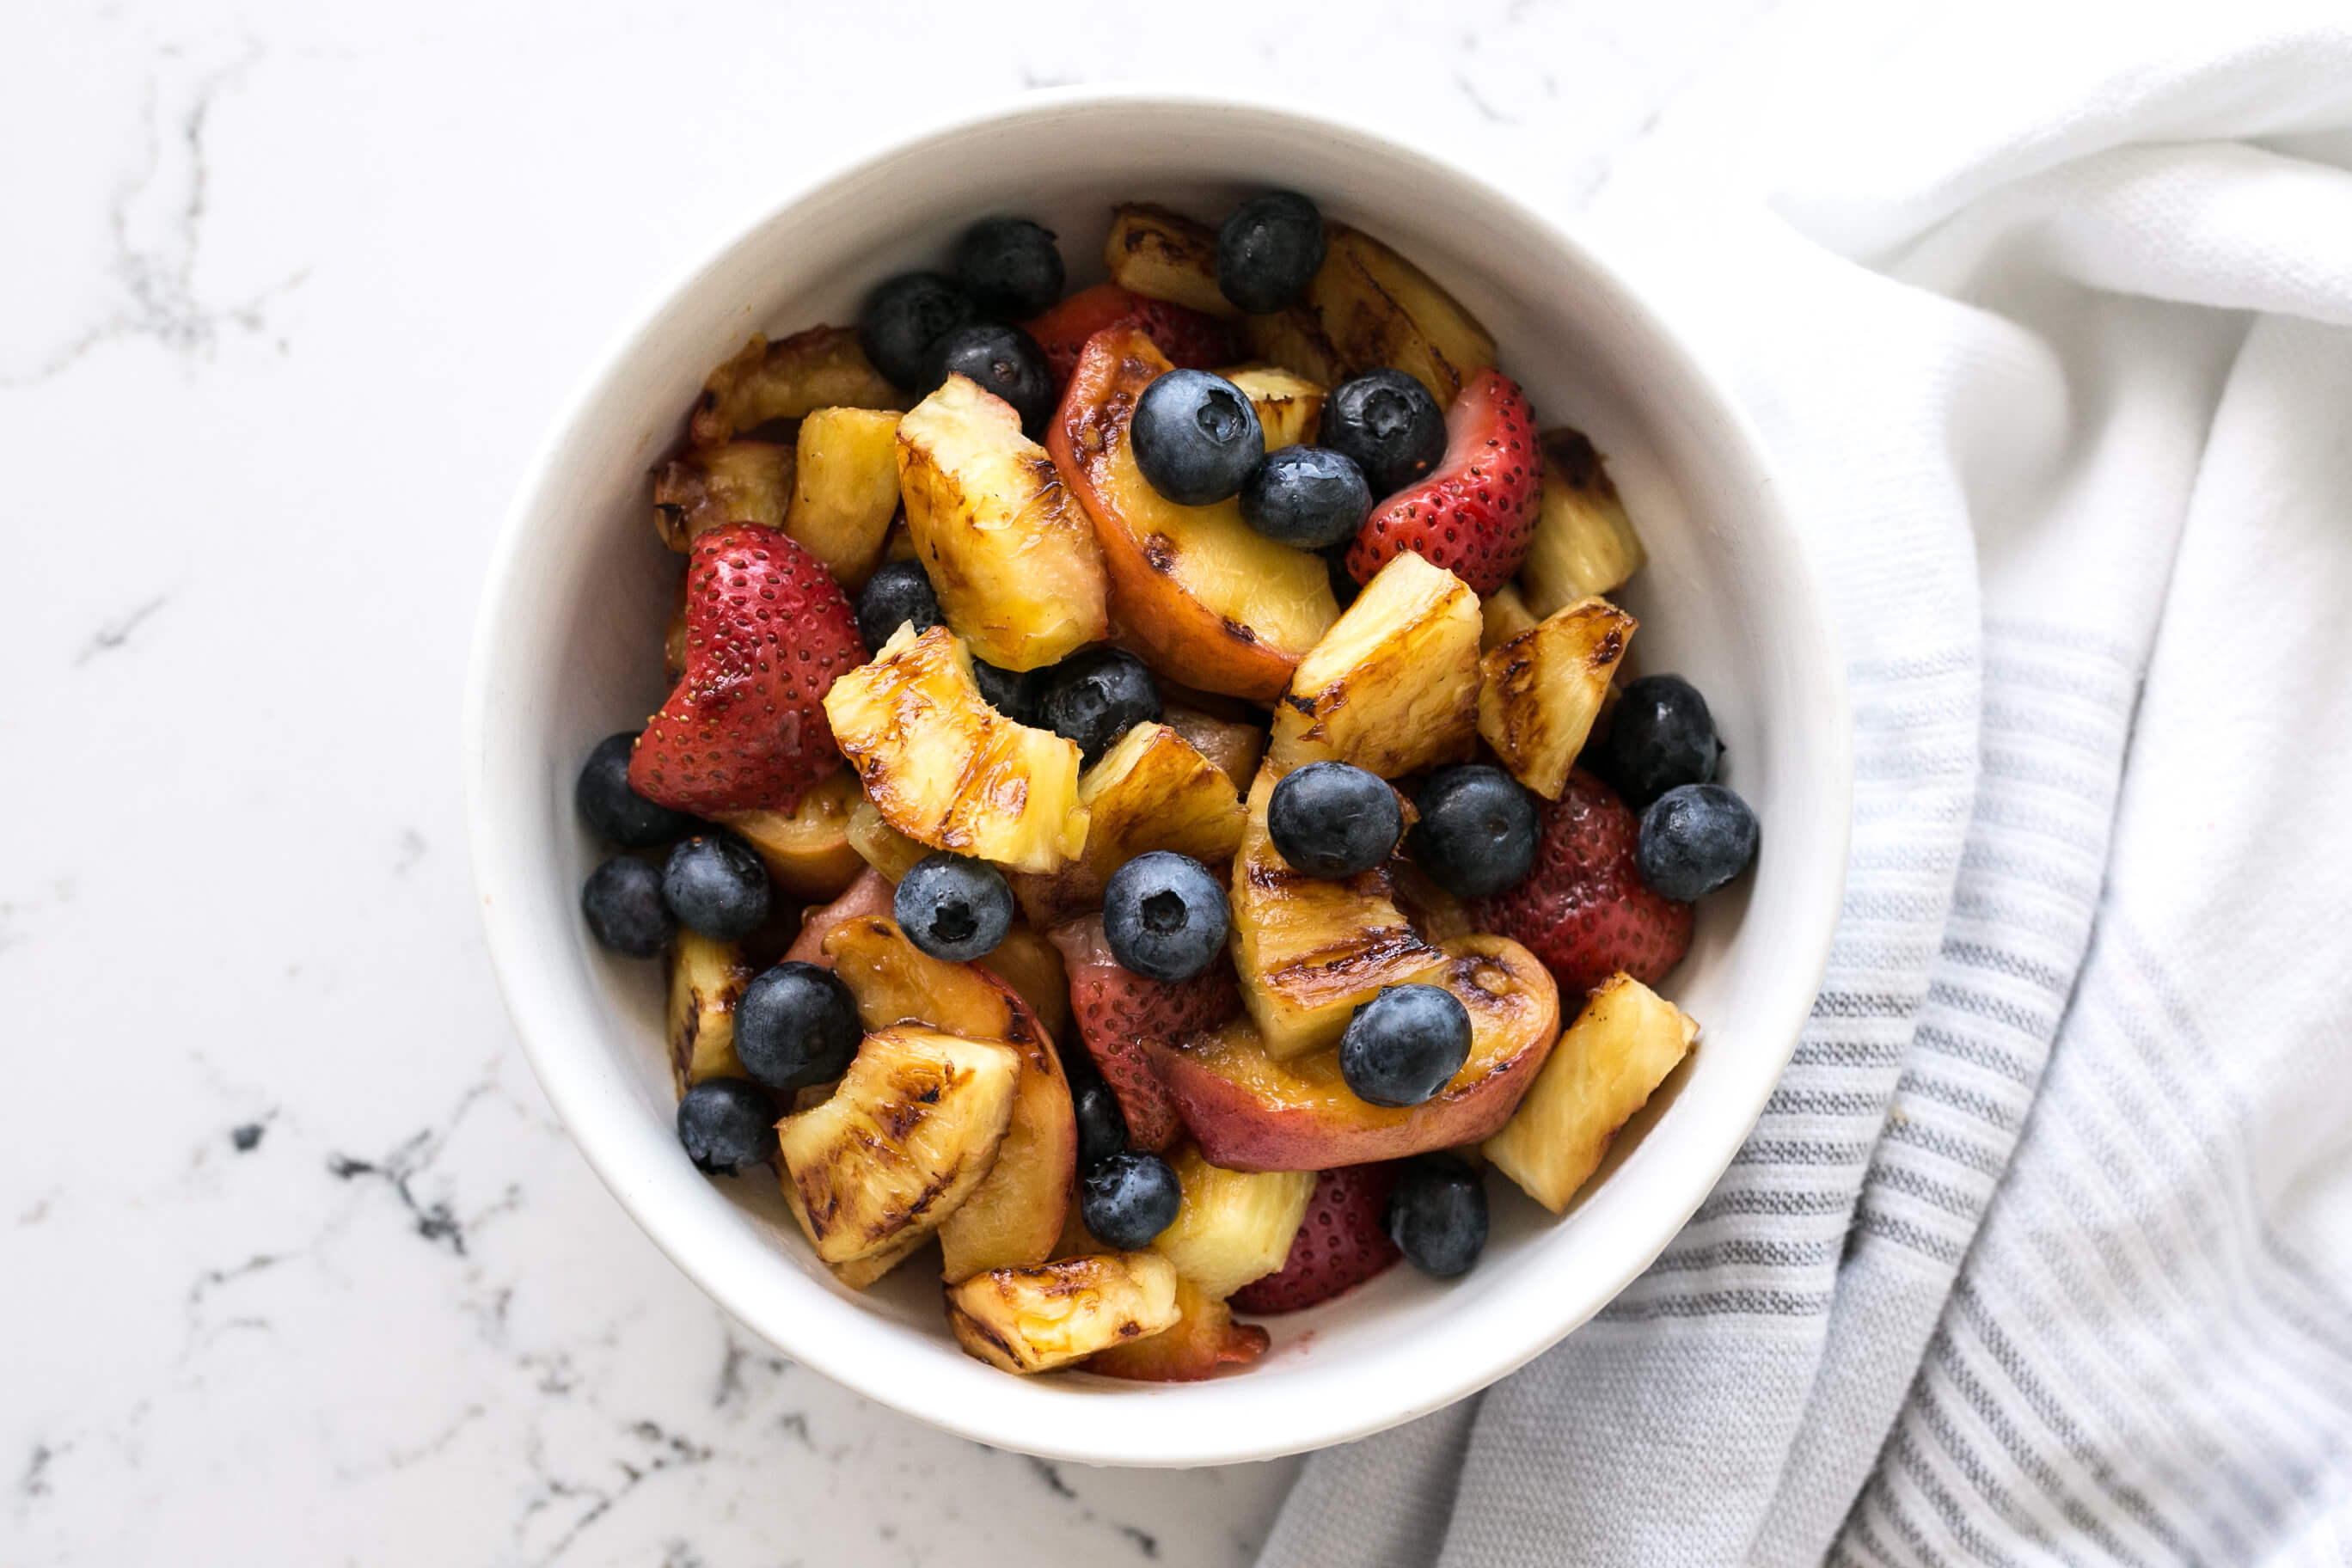 20 Meal Ideas Your Clients Can Grill This Summer: Grilled Fruit Medley